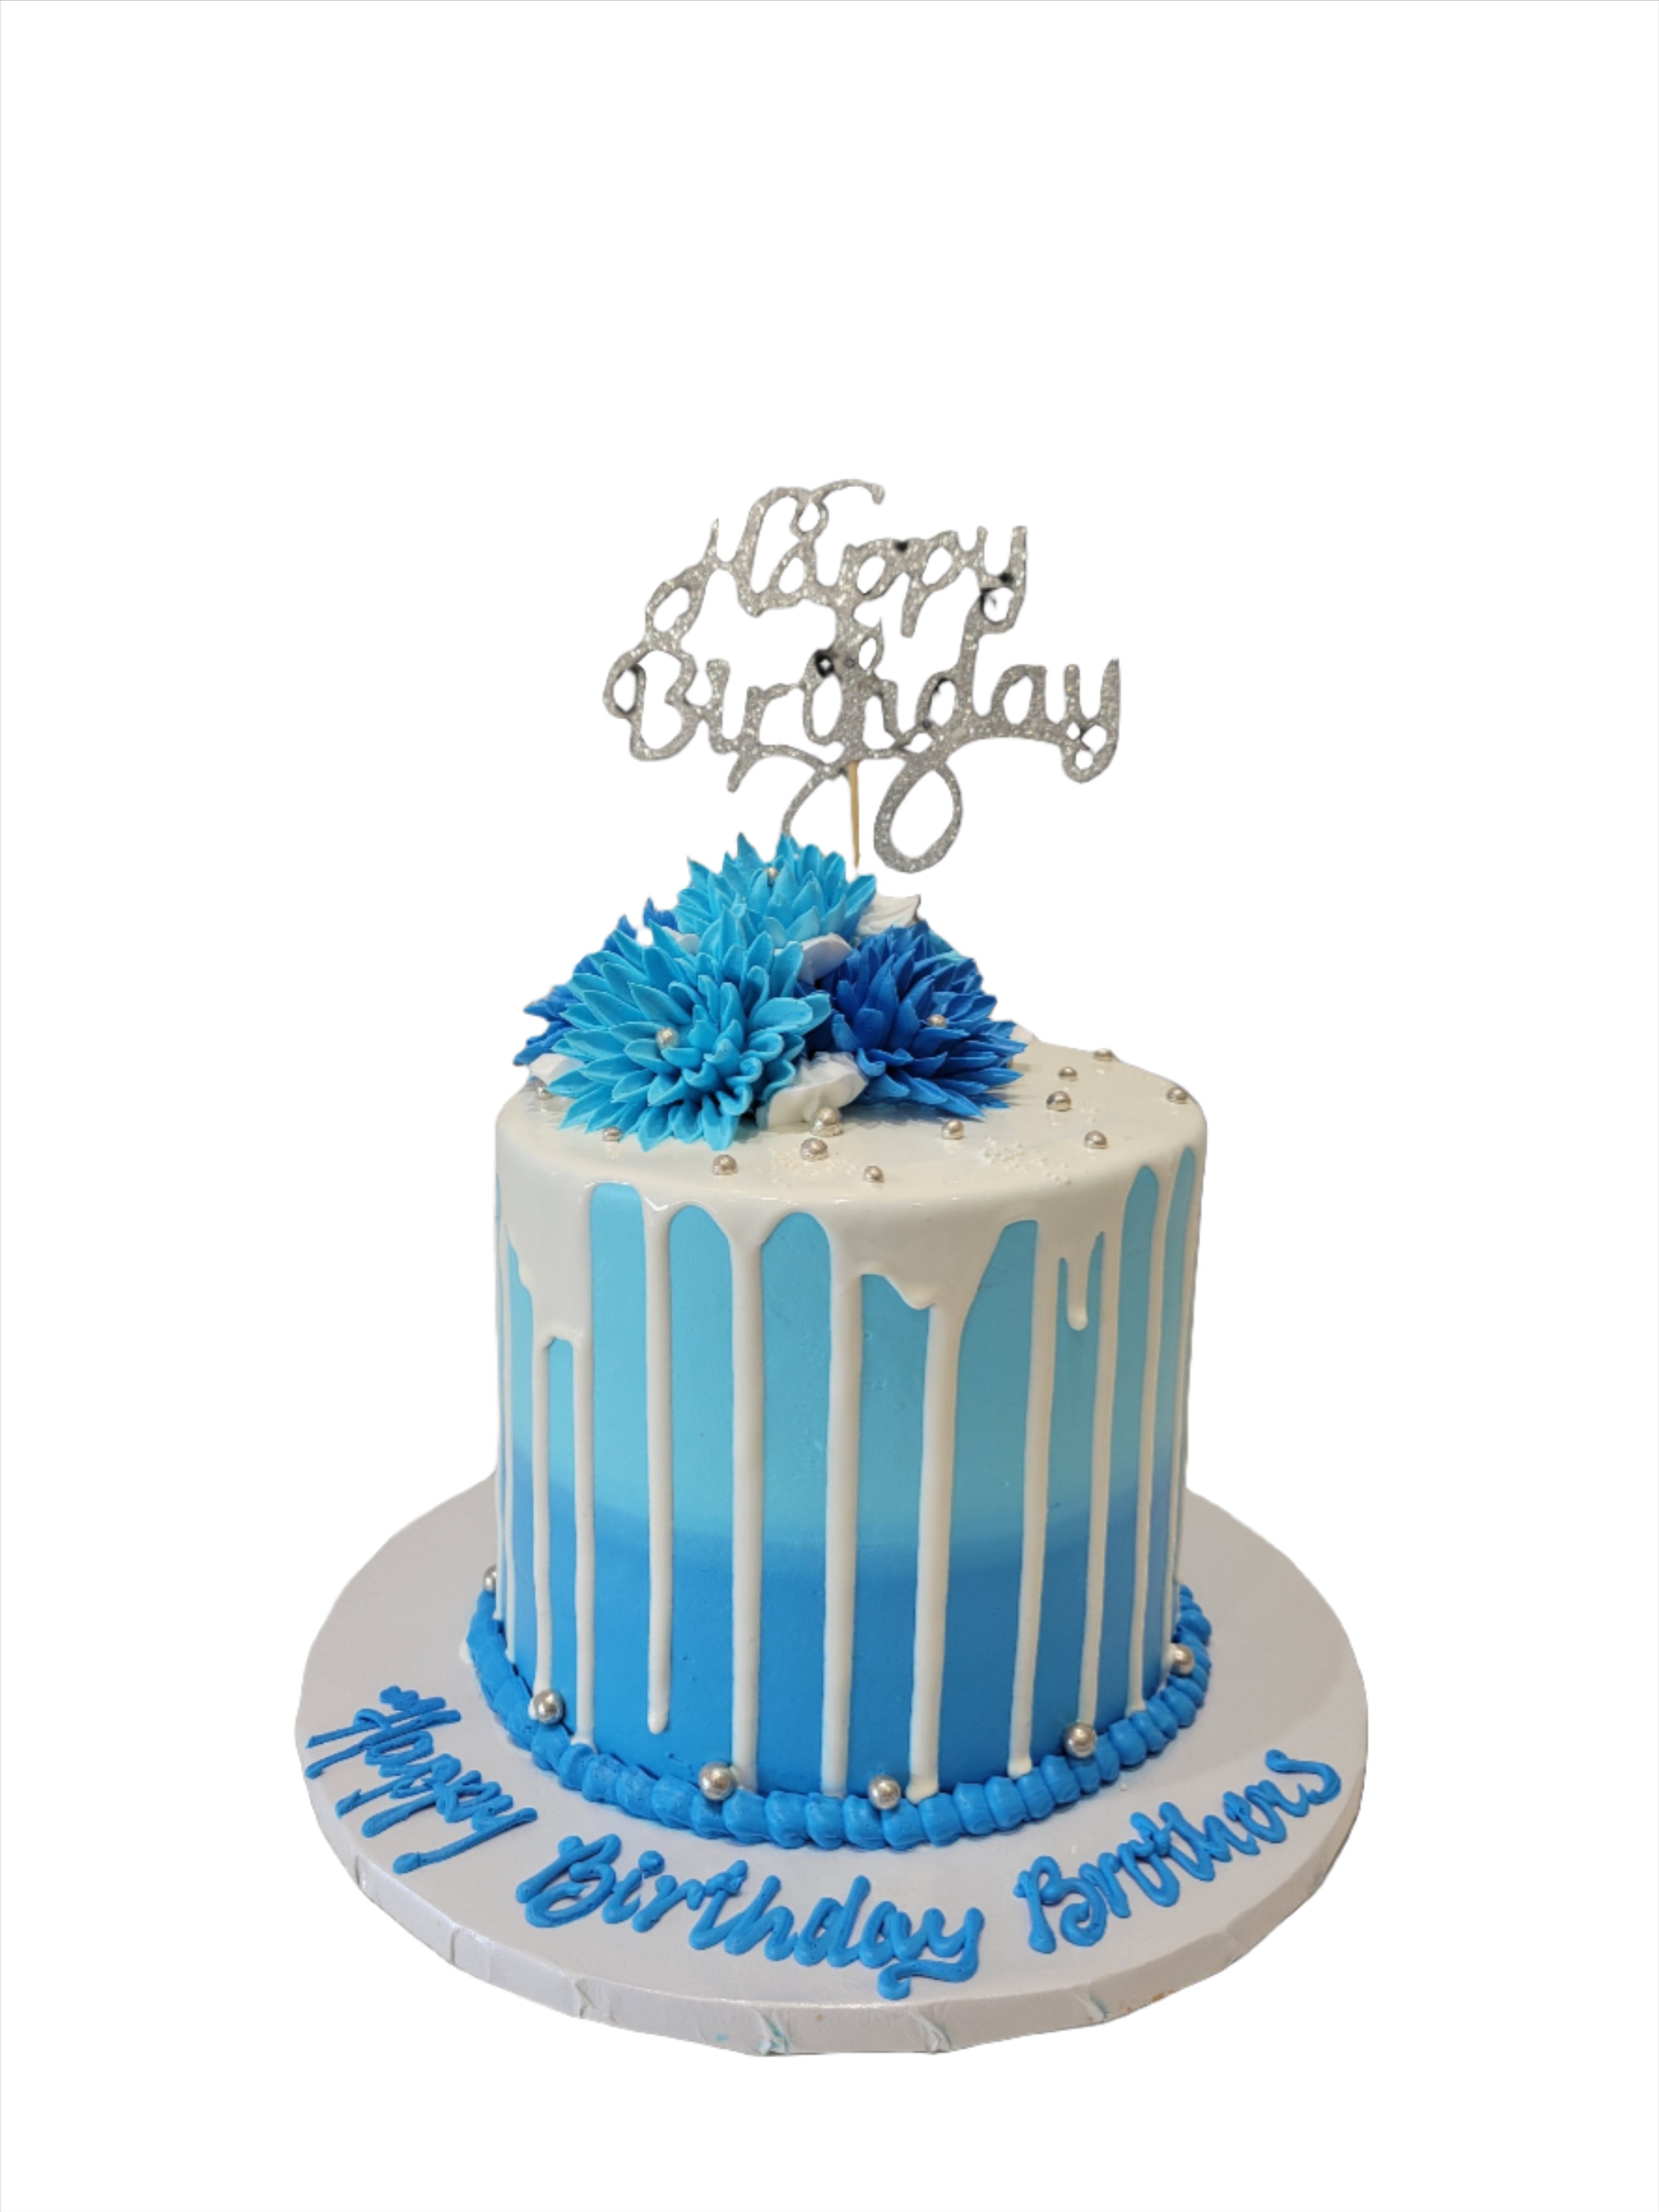 Get a Slice of Joy with Our Fancy Blue Cake - NEW! – Trophy Cupcakes